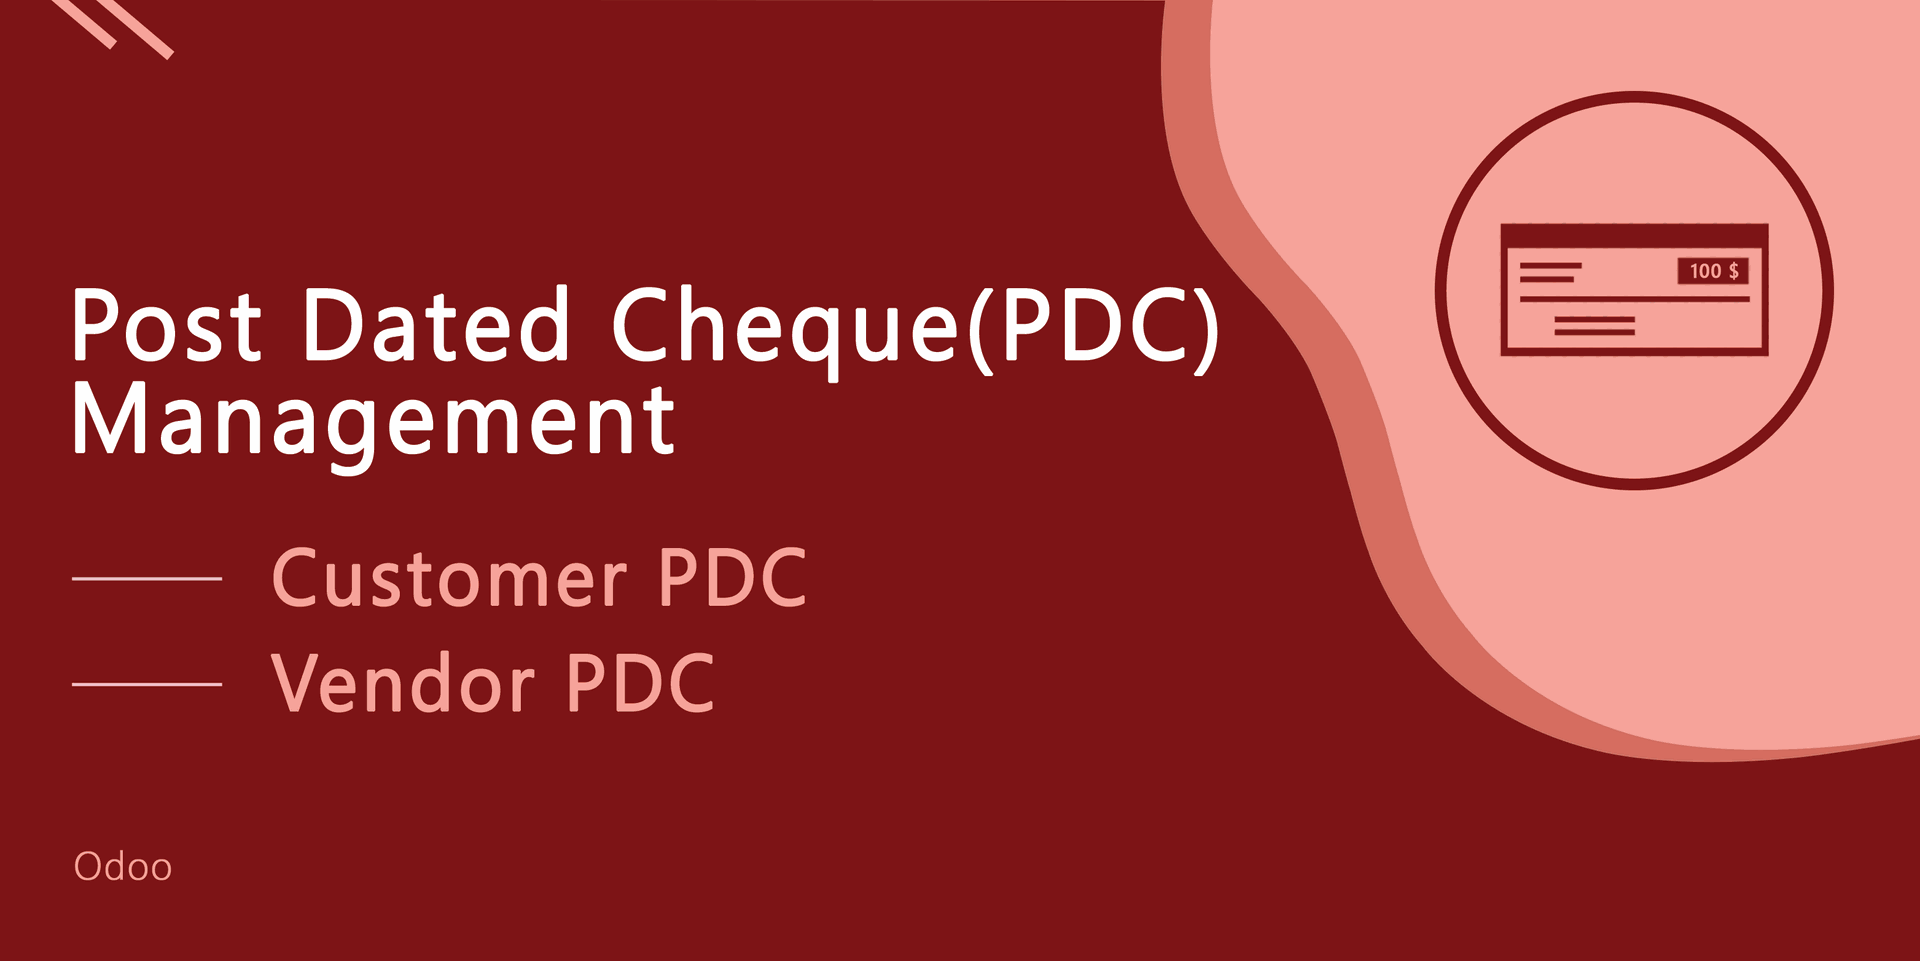 Post Dated Cheque Management
